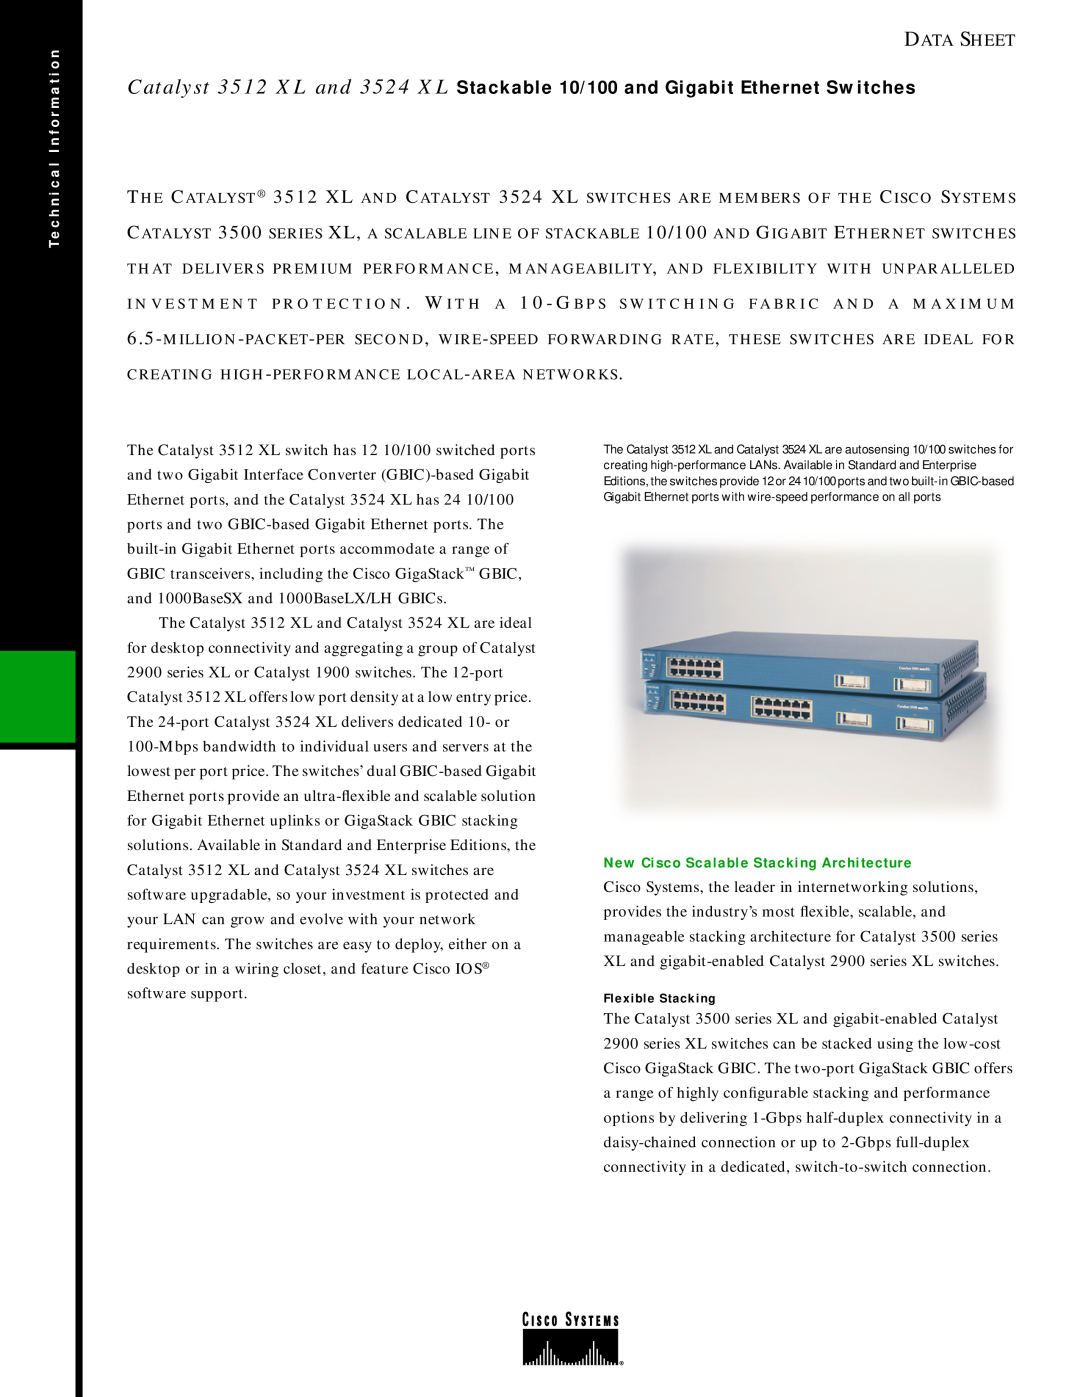 Cisco Systems 3524 XL manual New Cisco Scalable Stacking Architecture, Data Sheet, Te c h n i c a l I n f o r m a t i o n 